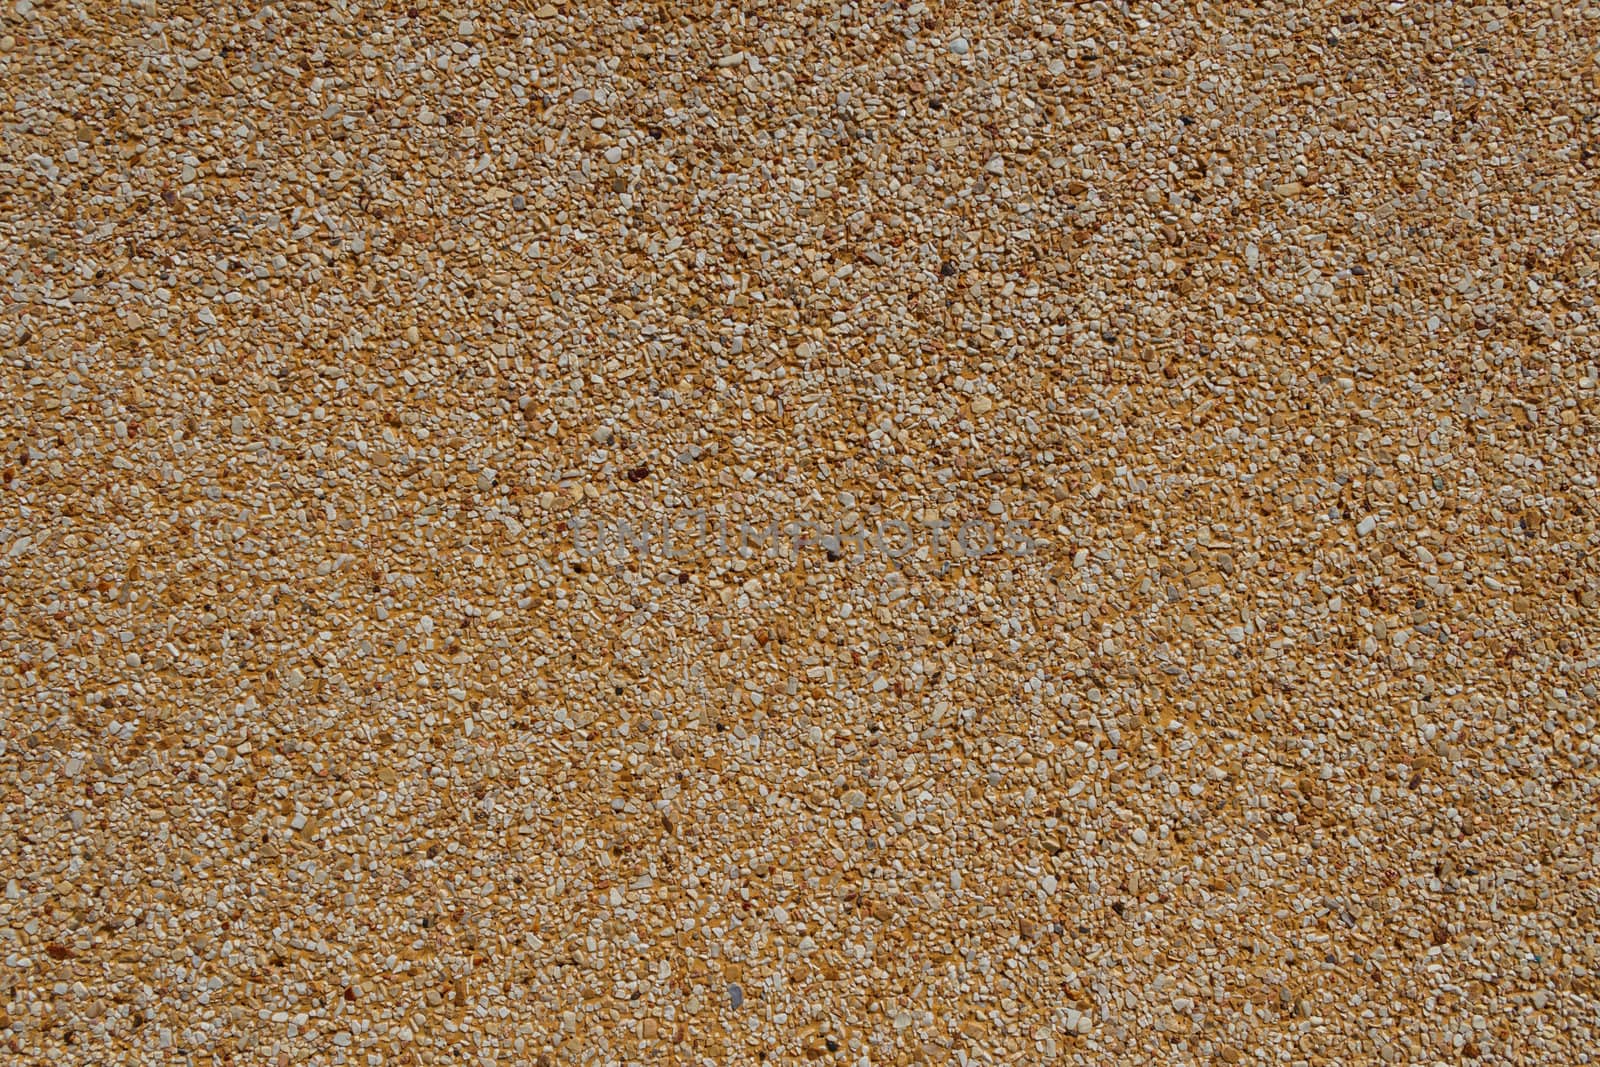 Tiny gravel texture on brown wall texture by punpleng